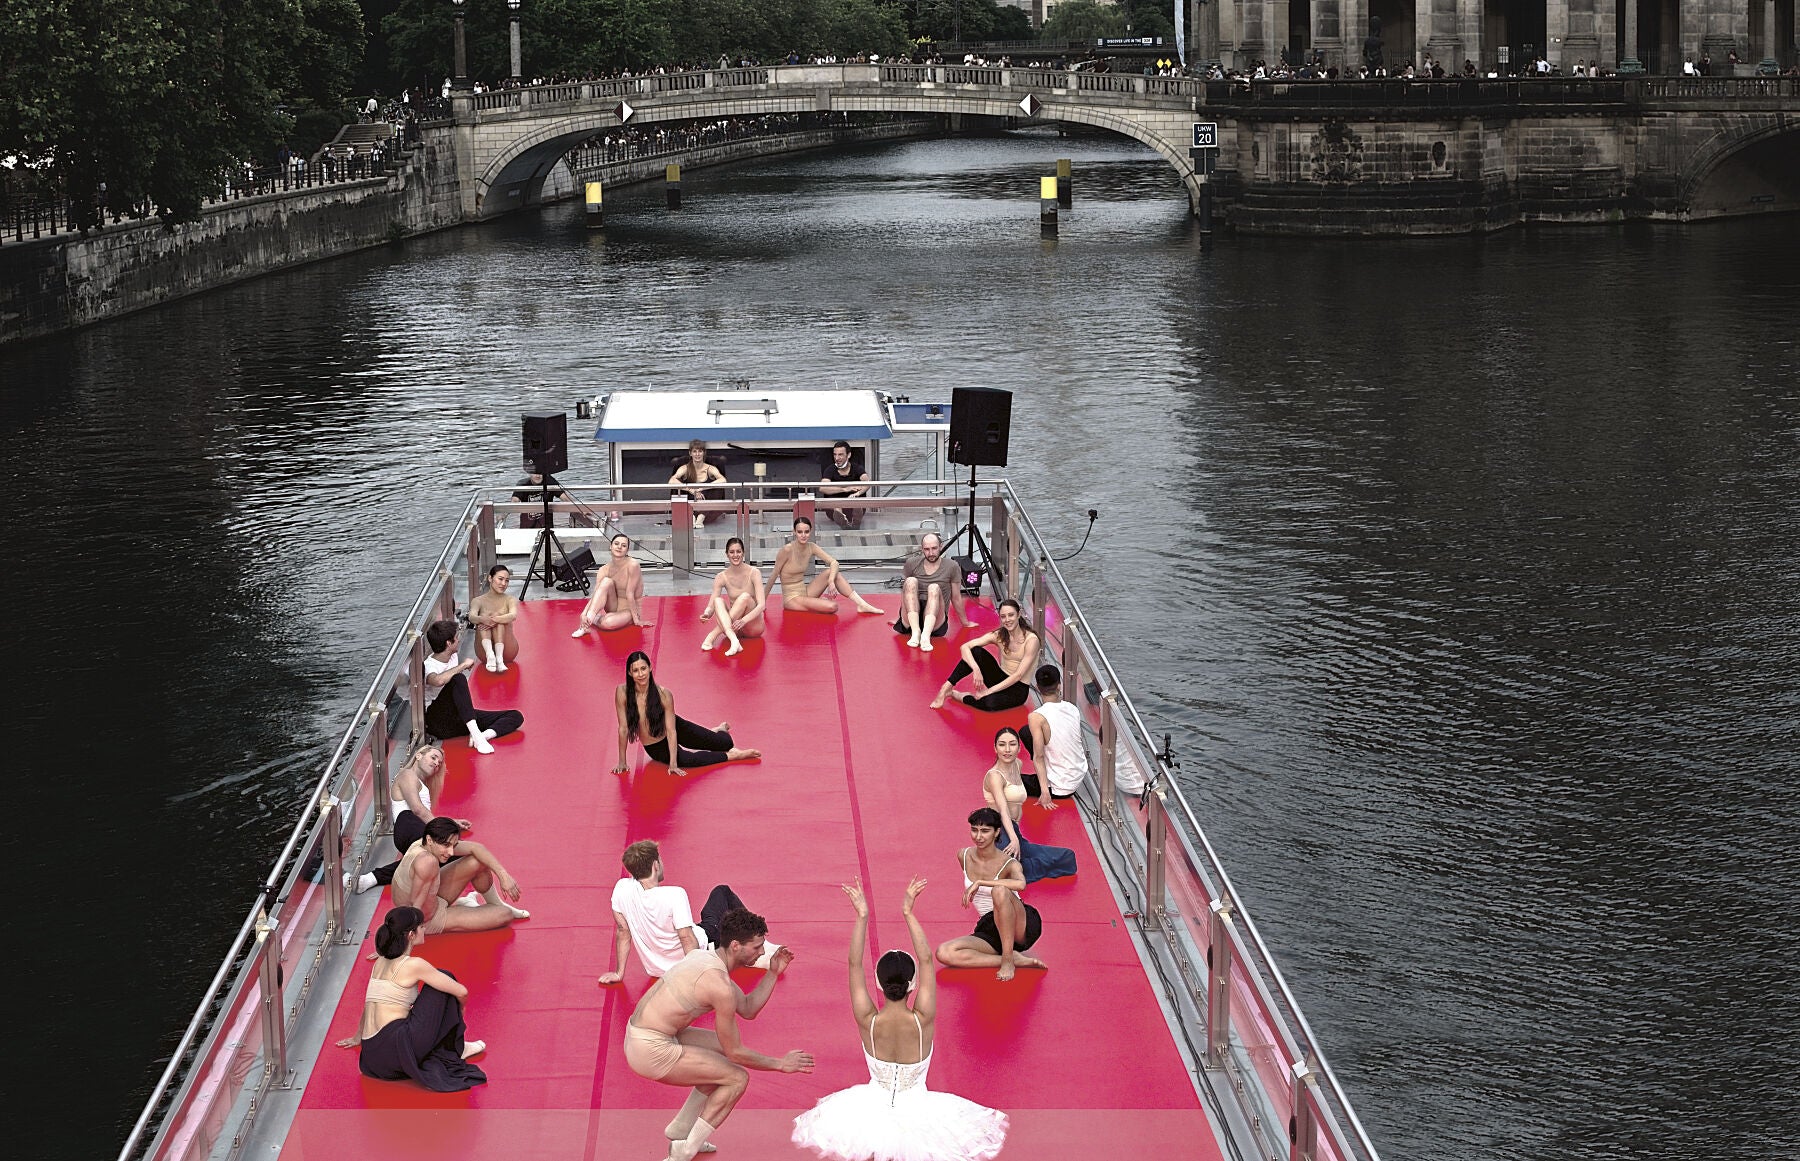 Tip to nails - Staatsballett Berlin - little boat tour FROM BERLIN WITH LOVE - ON THE RIVER SPREE! © Prosper Jerominus 2021 - Giclee Hahnemuhle Photorag